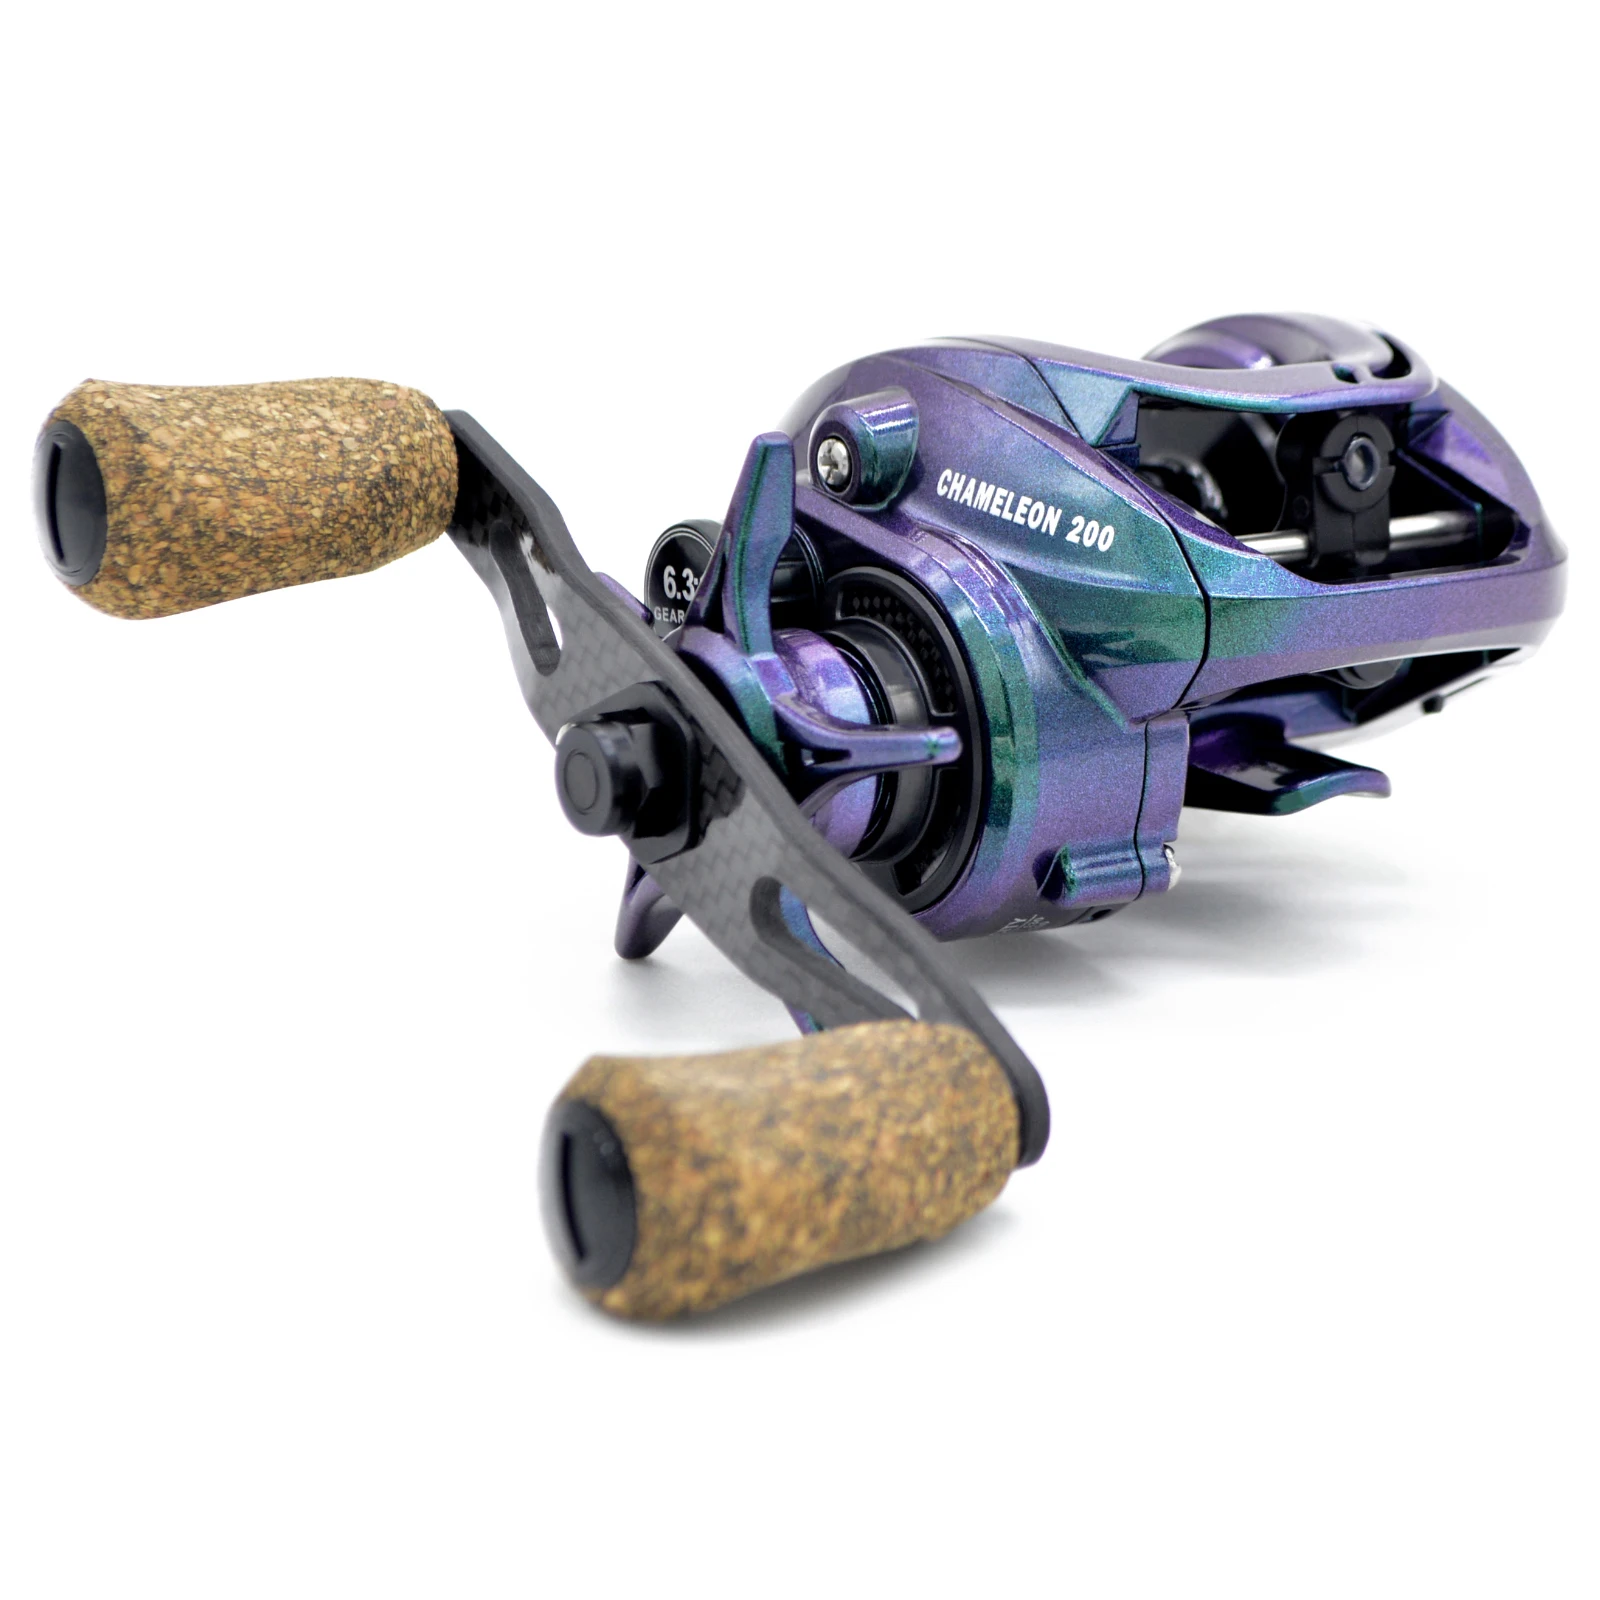 CAMEKOON Chameleon 200 Baitcasting Reels 6.3:1 Smooth Casting Coil Light  Carbon Frame Power Handle Saltwater Lure Fishing Wheel